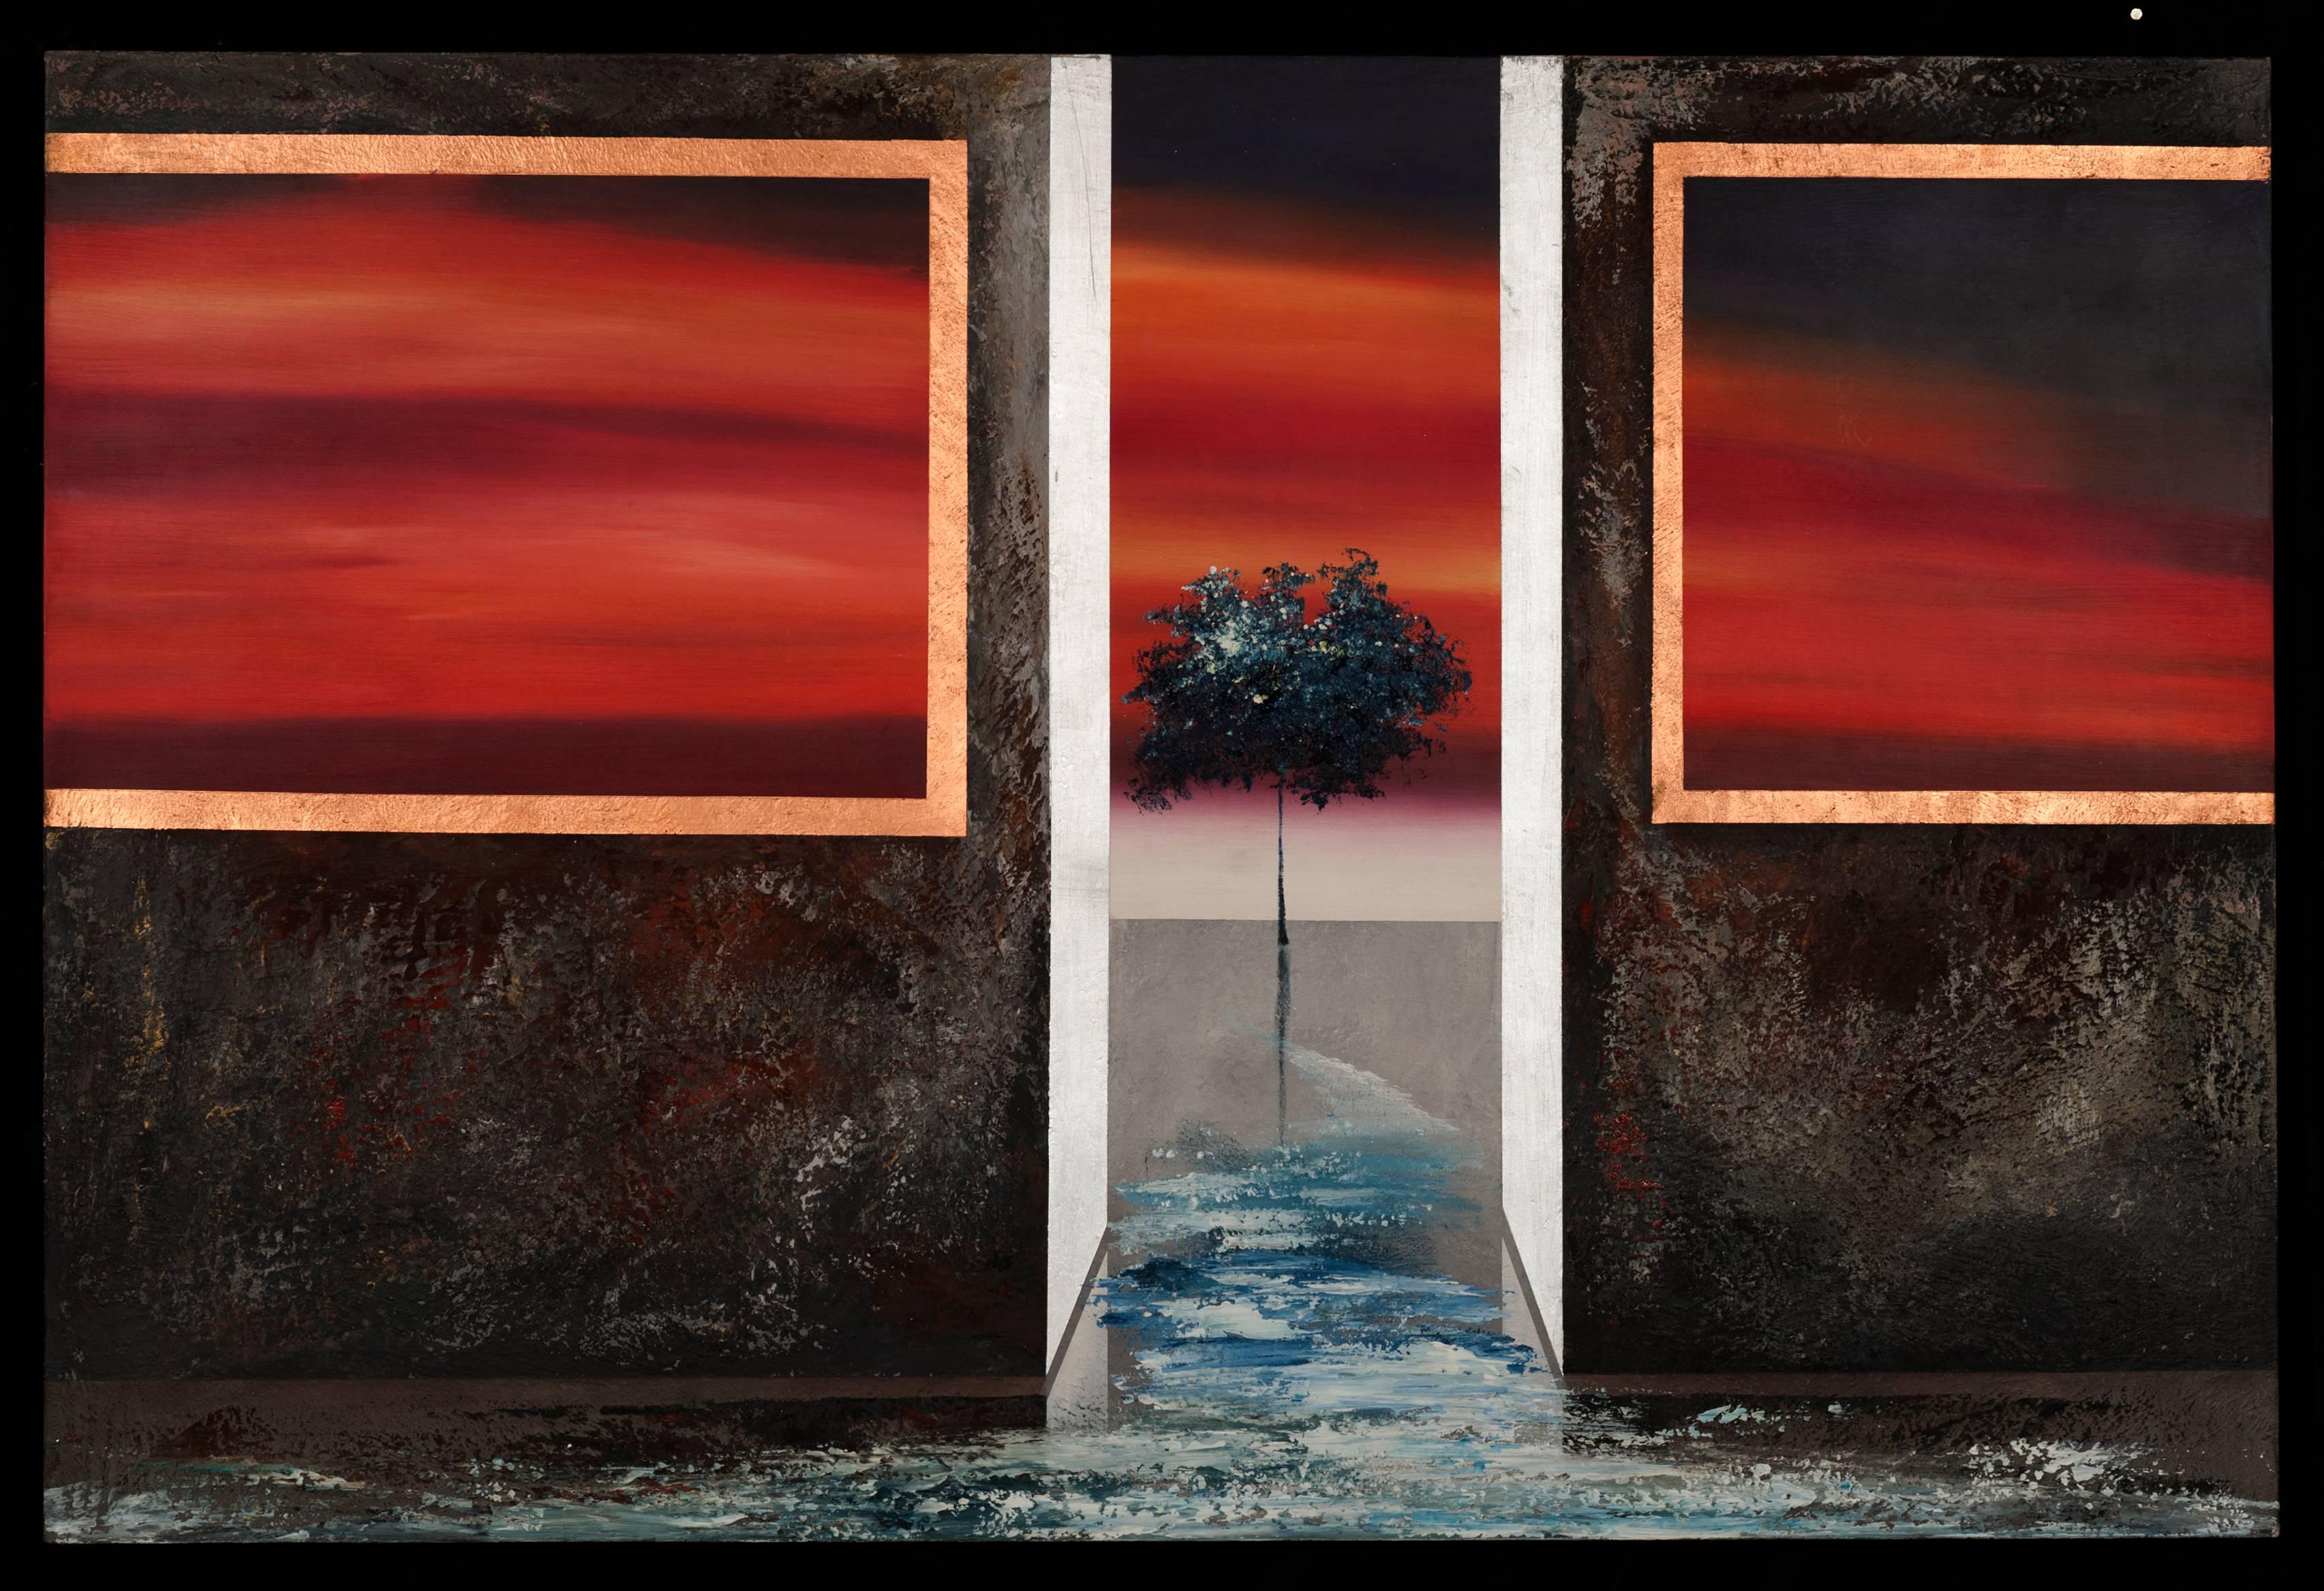 Terra do Fogo surreal painting oil on canvas- sunset red